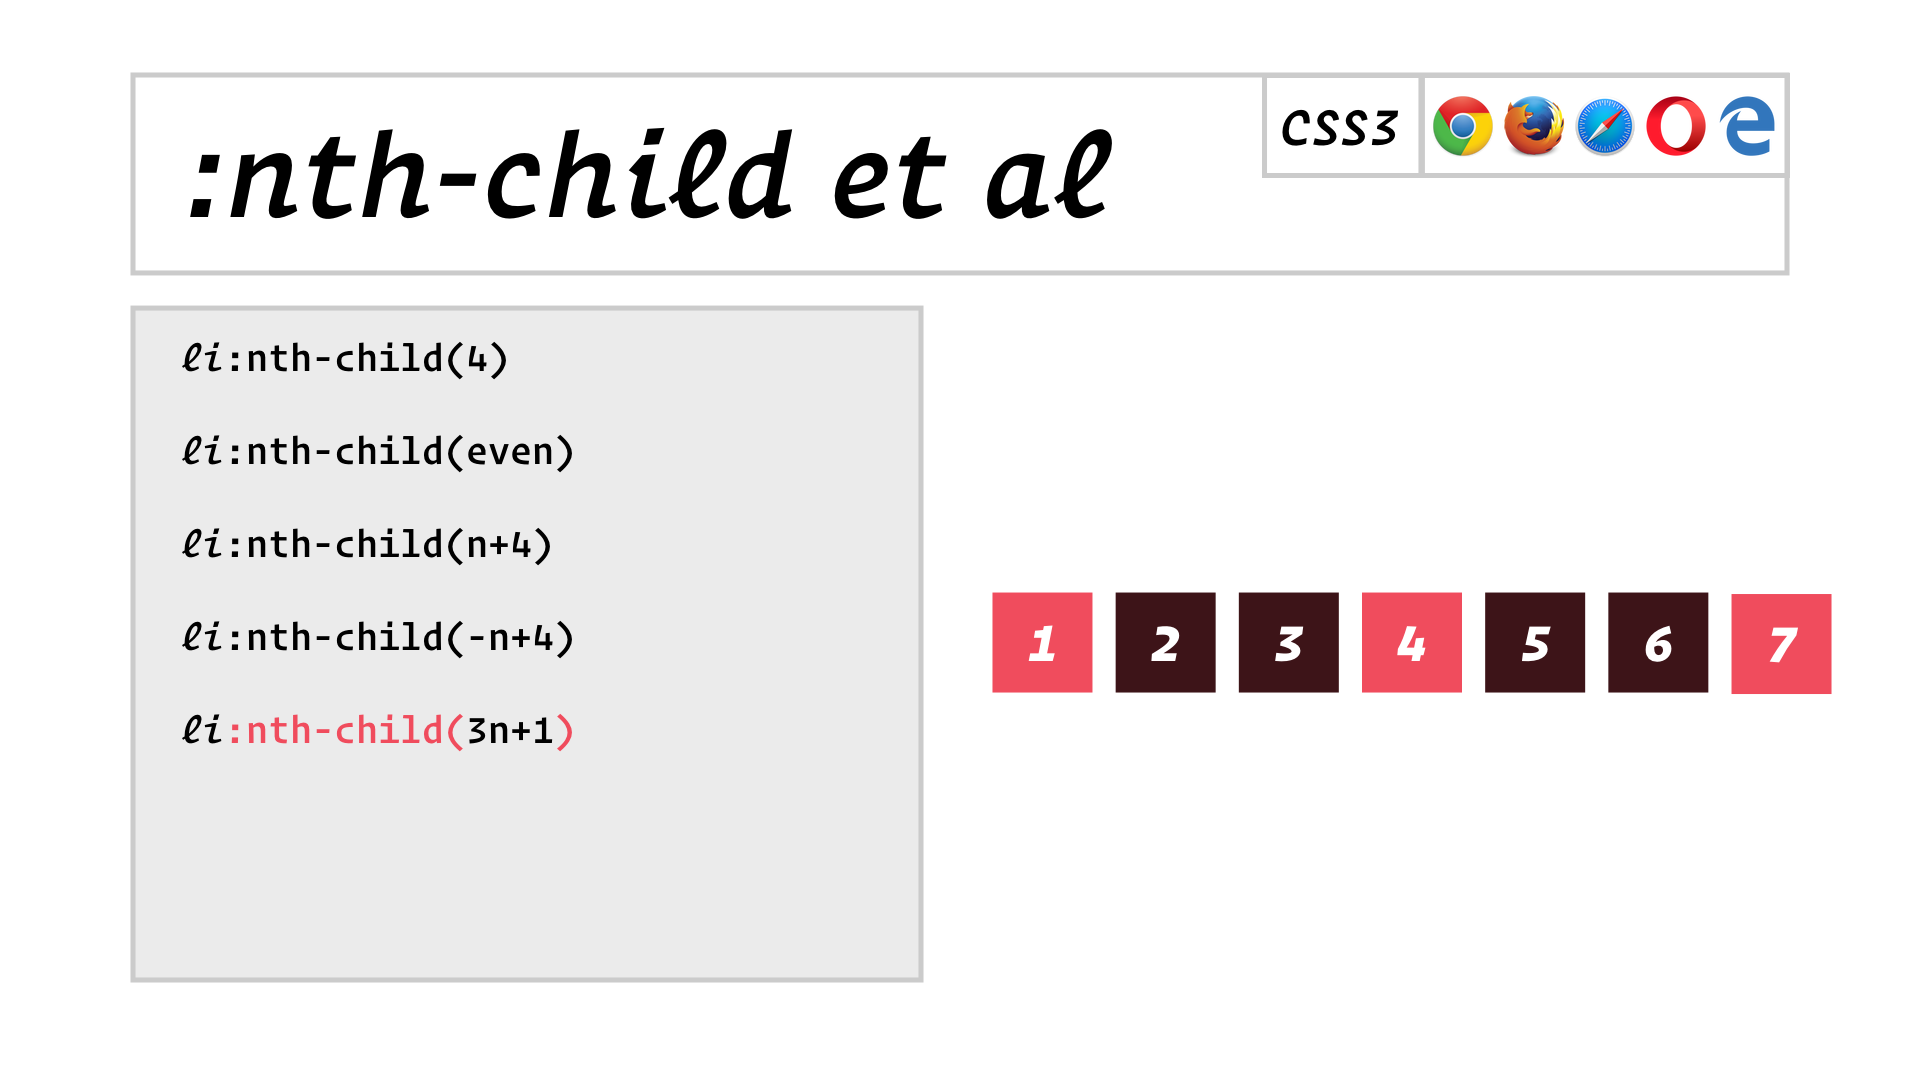 slide: :nth-child(3n+1) selects the 1st, 4th, 7th child and so on